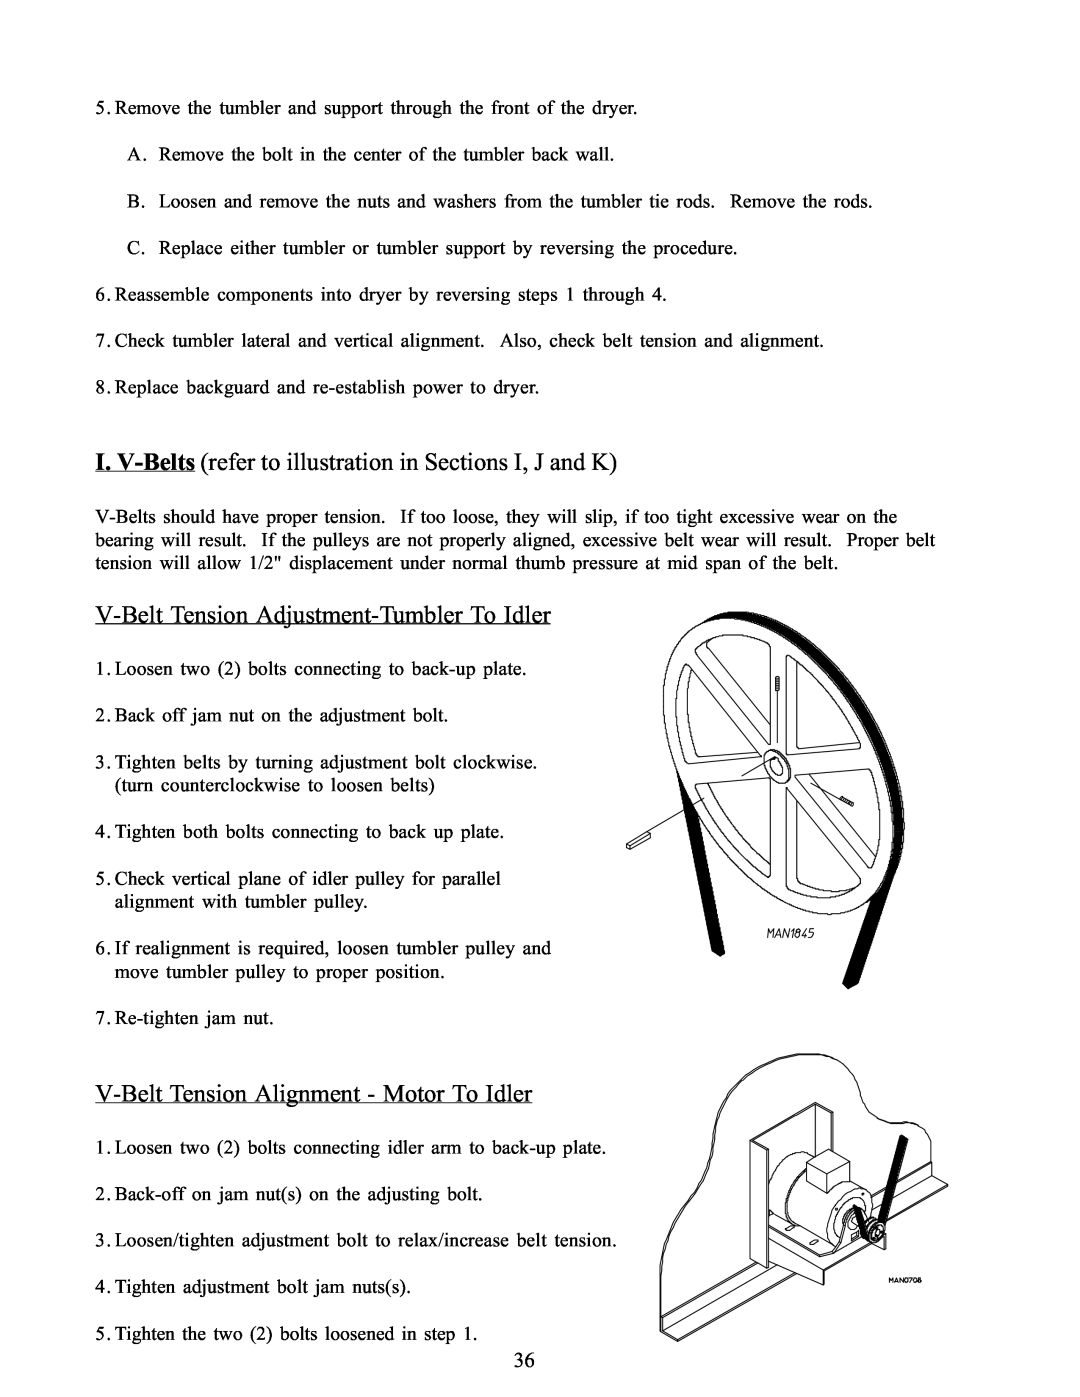 American Dryer Corp WDA-385 service manual I. V-Belts refer to illustration in Sections I, J and K 